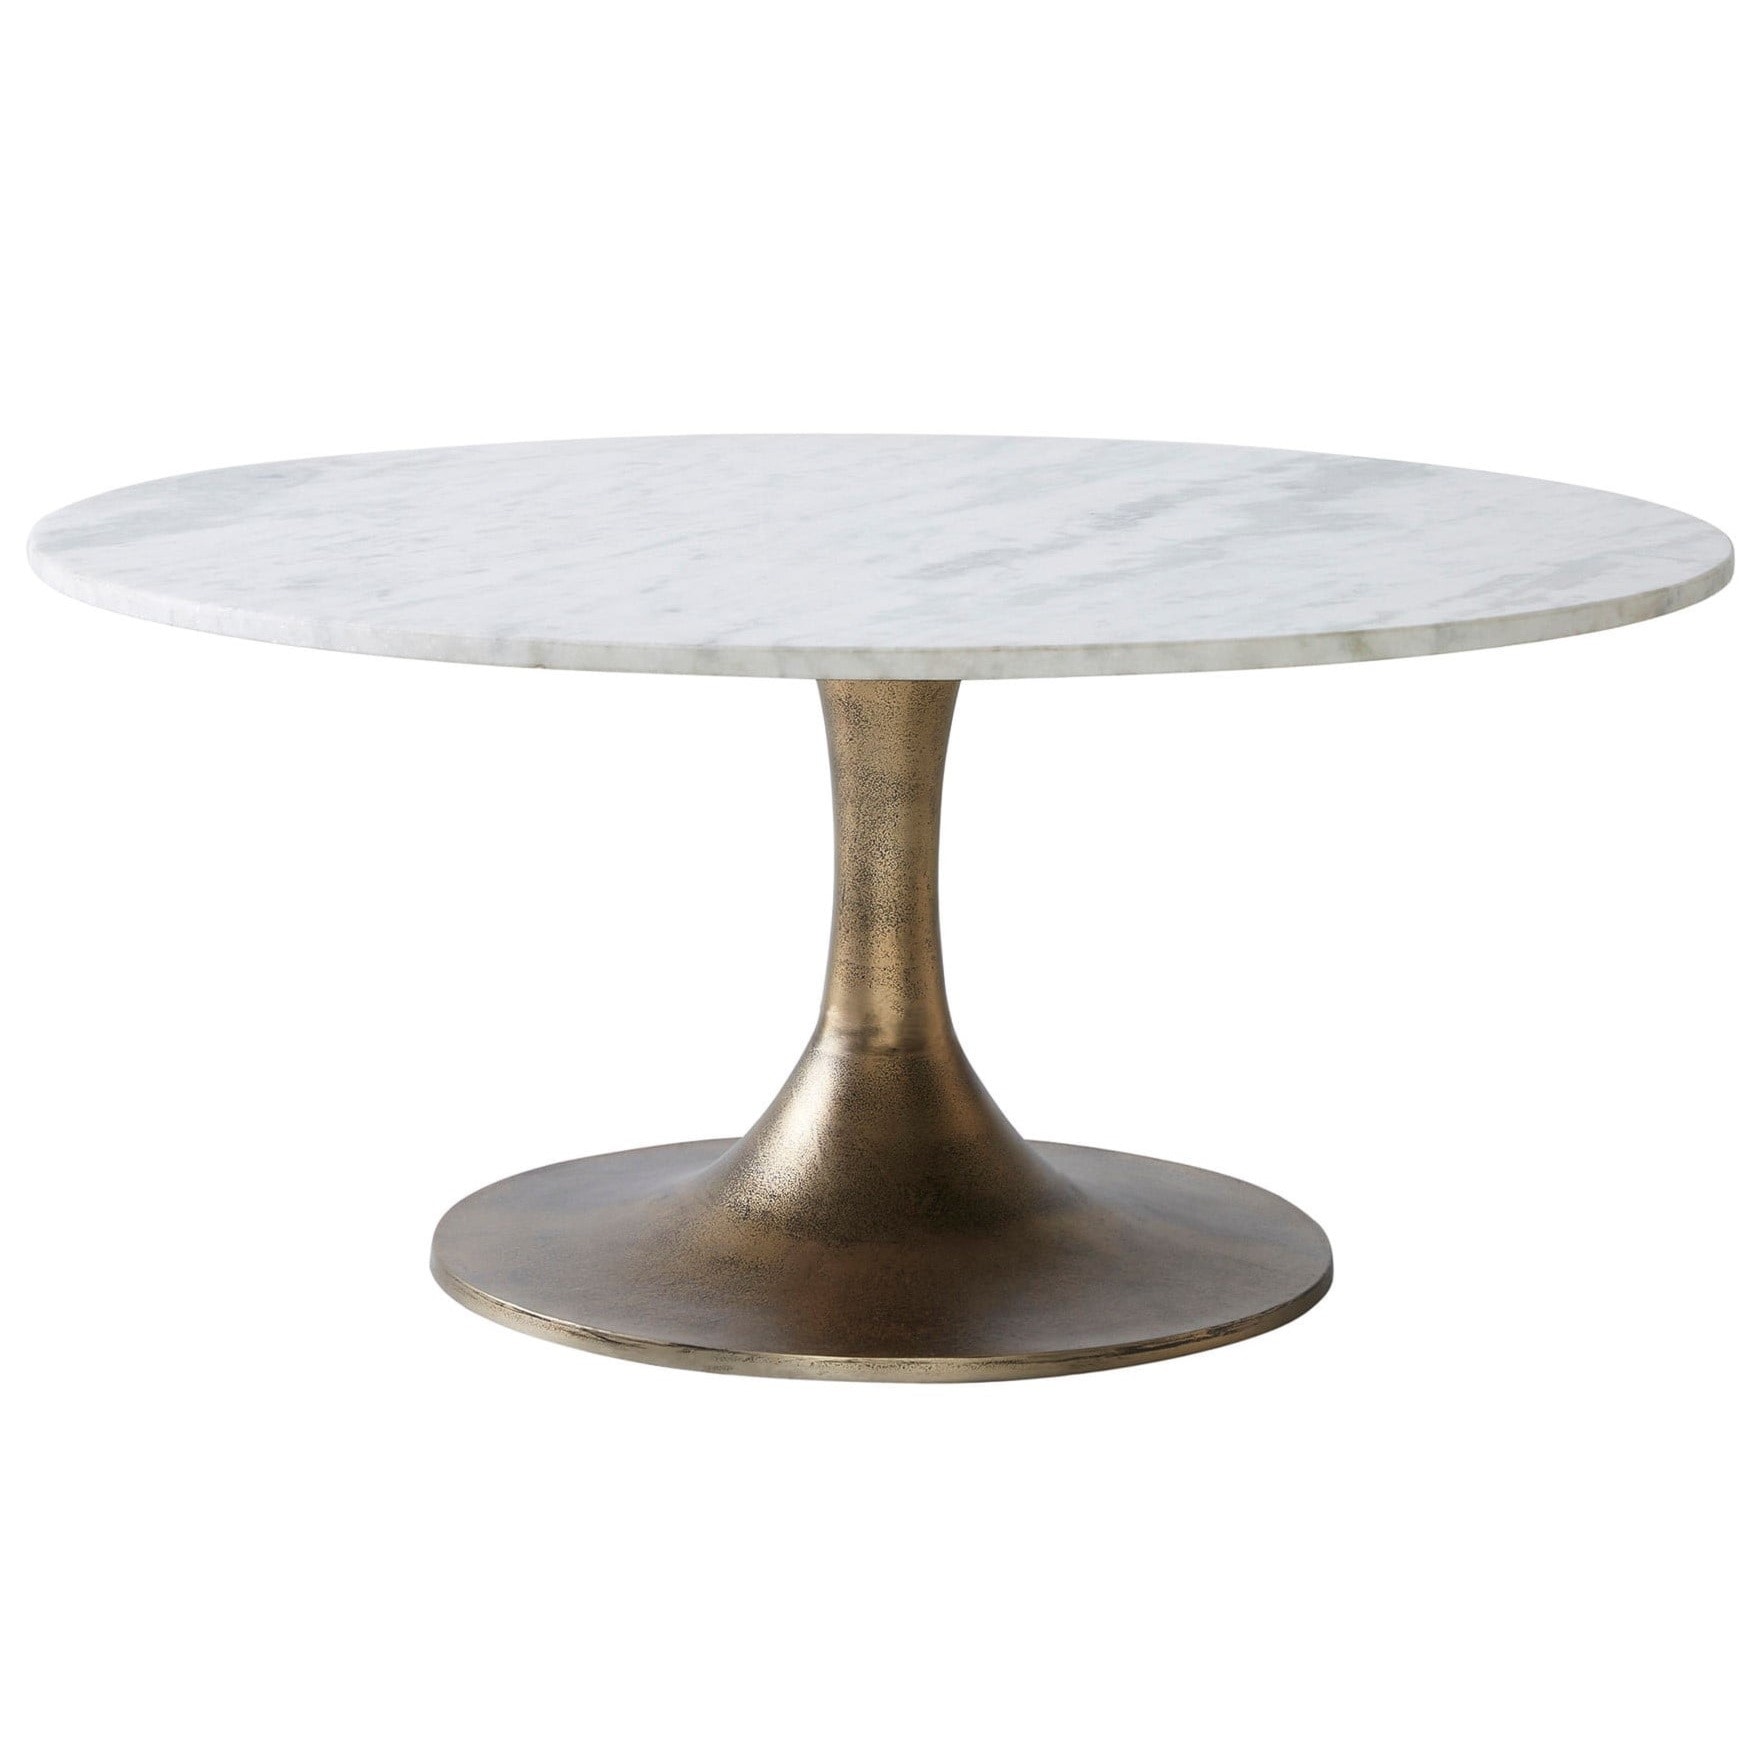 Shop the Coffee Table from Option 1